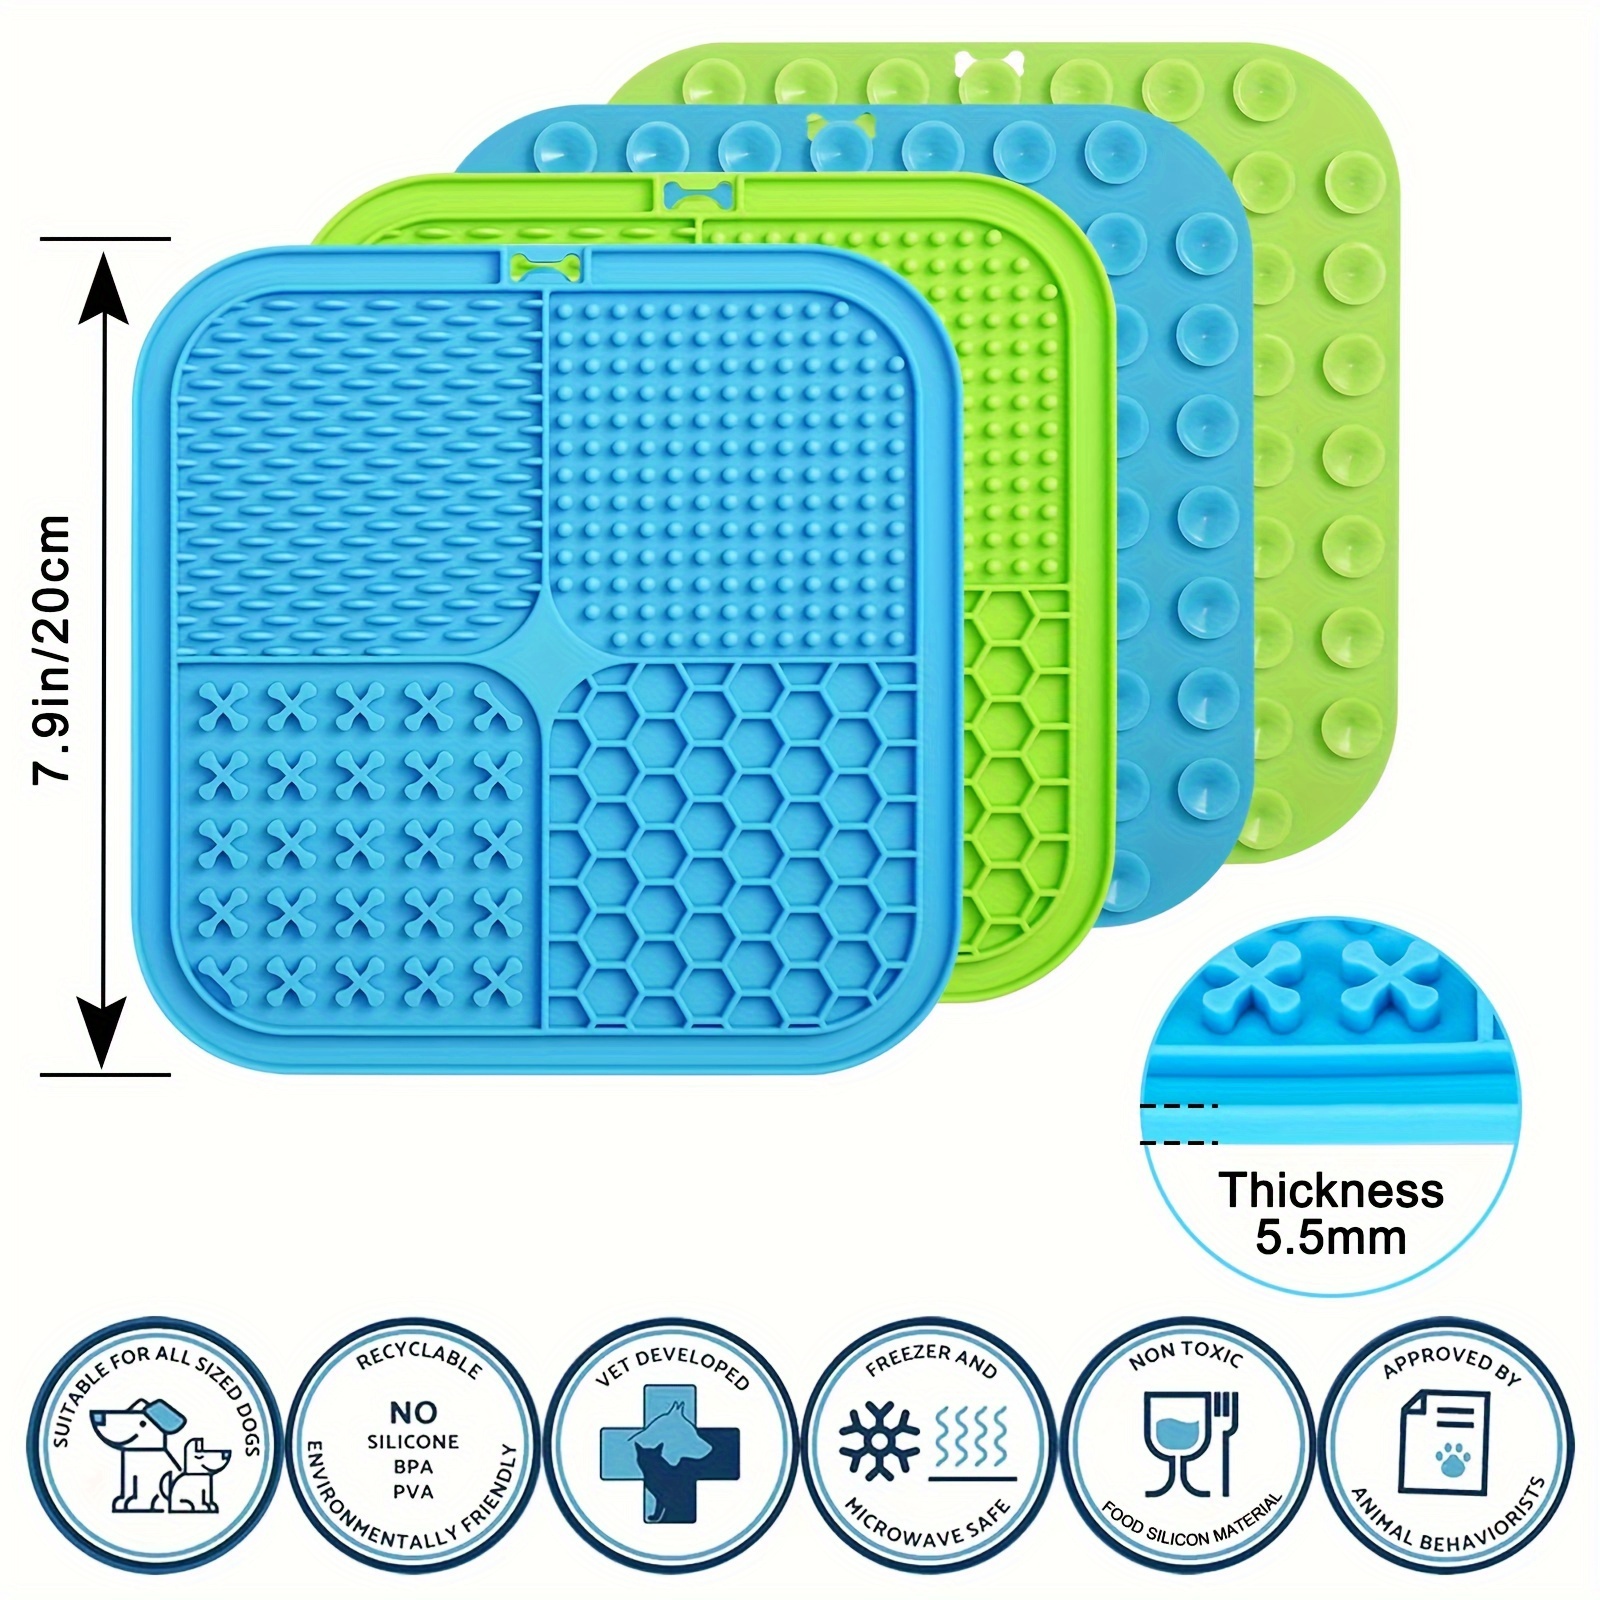 Lick Mats for Dogs, Dog Cage Training Licking Mat for Dogs, Multipurpose  Lick Pads for Boredom and Reduce Dog Anxiety, Slow Feeding Pads for Dogs  and